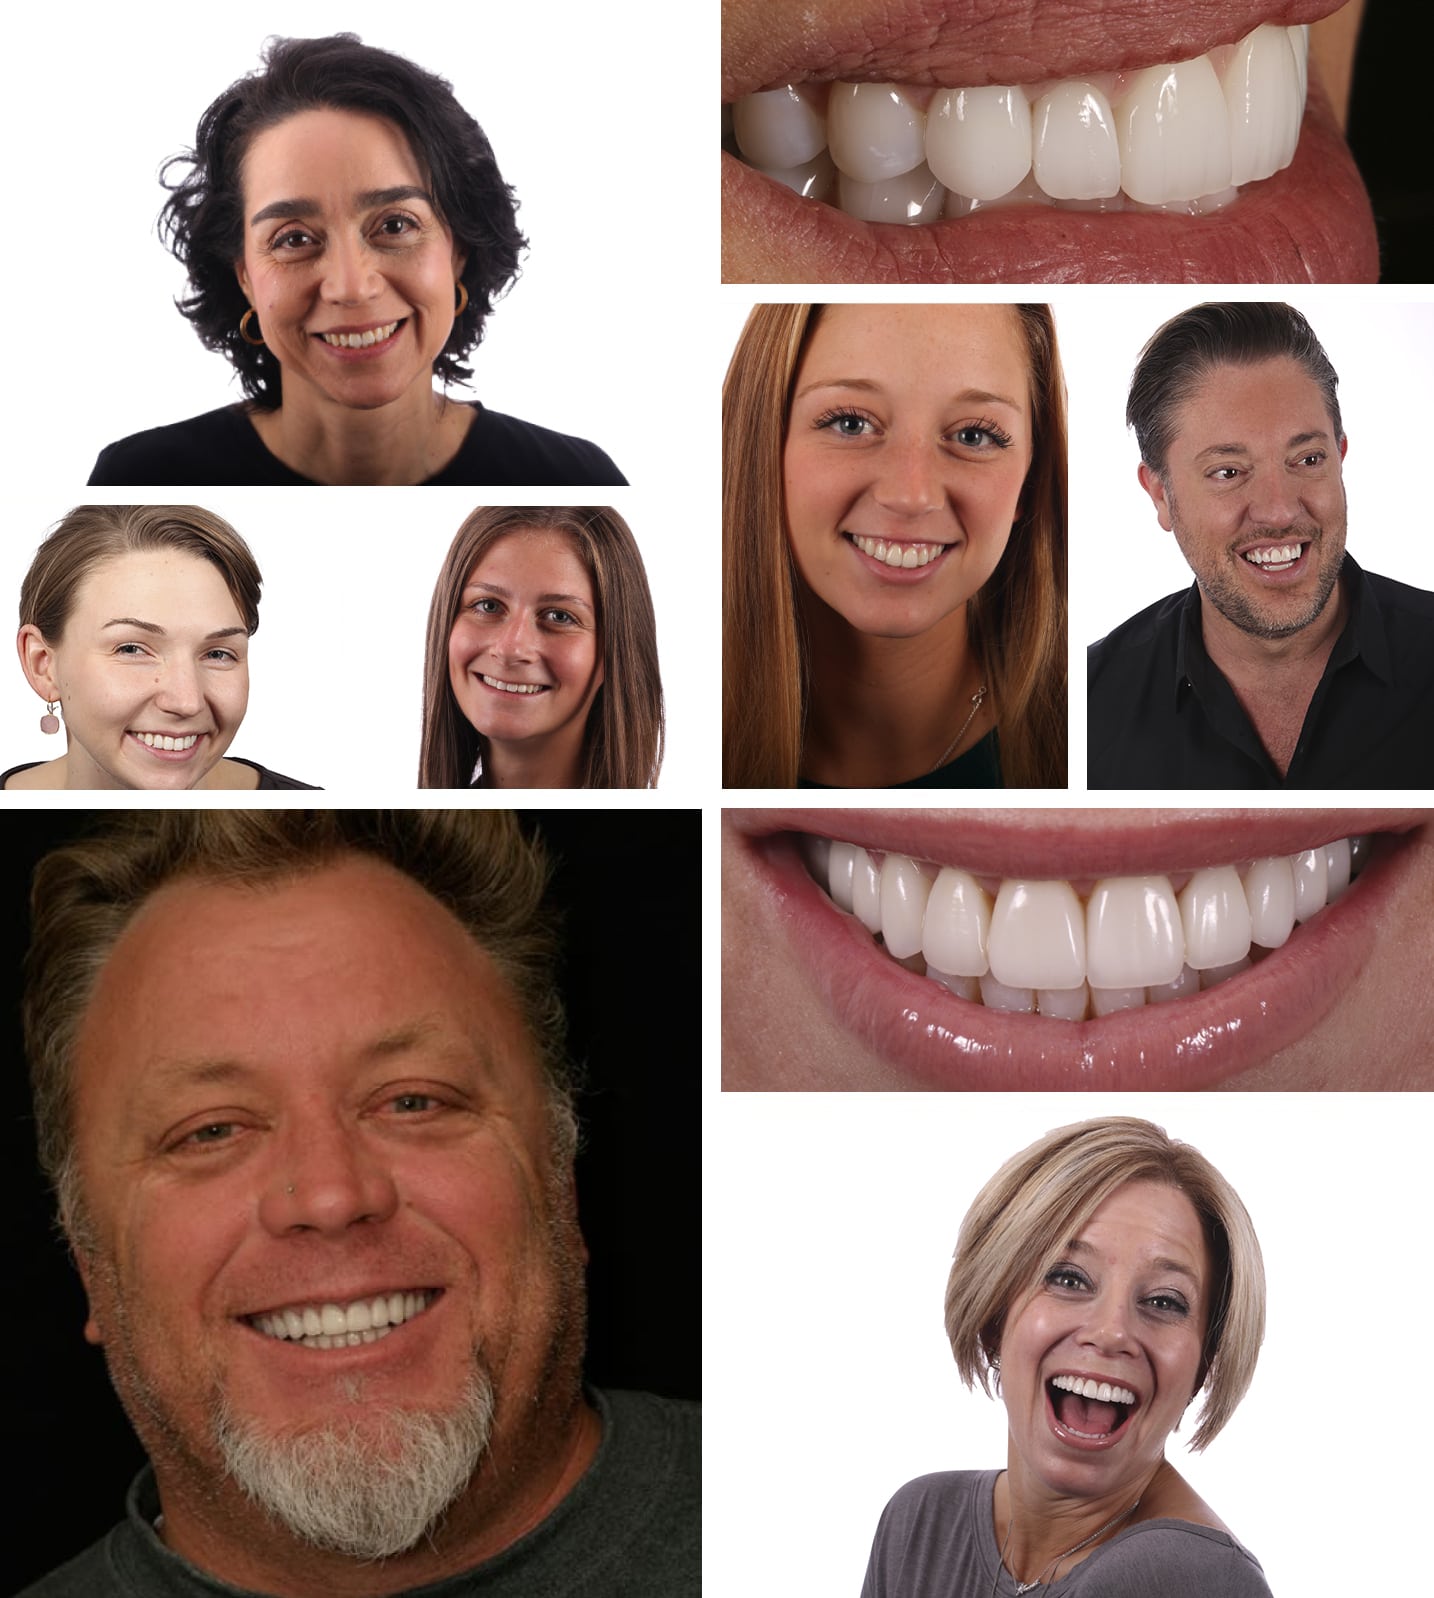 A collage of the beautiful new smiles of Dr. Stelzer's patients